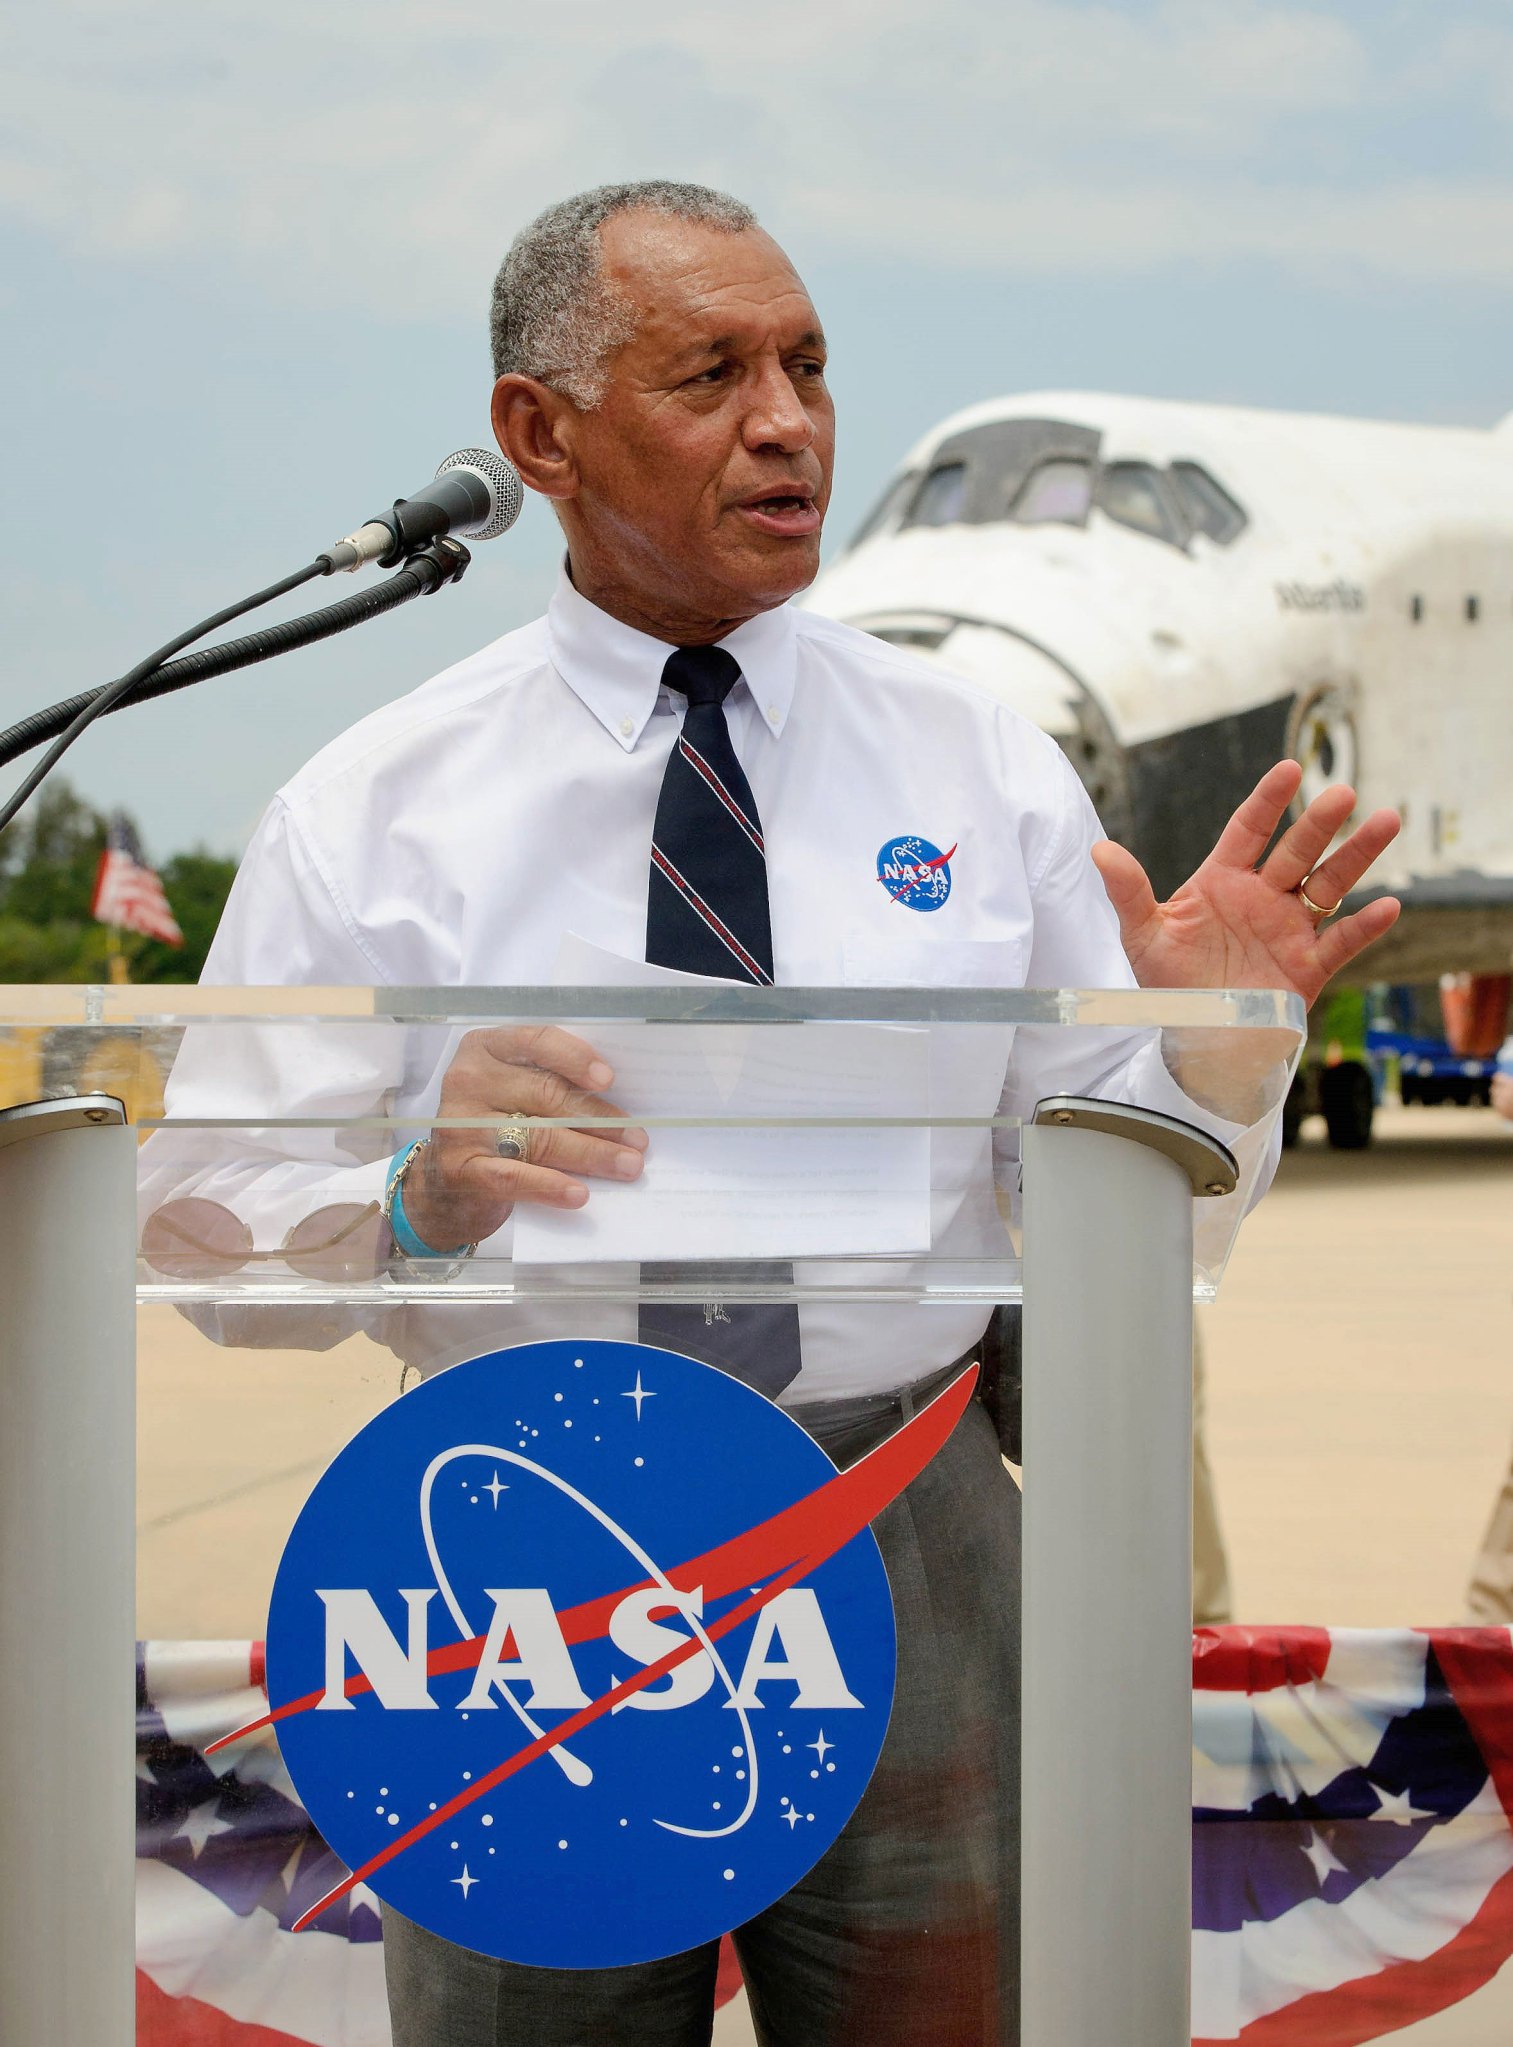 Former Kennedy Space Center Director Charles Bolden speaks during a media event at the Shuttle Landing Facility.